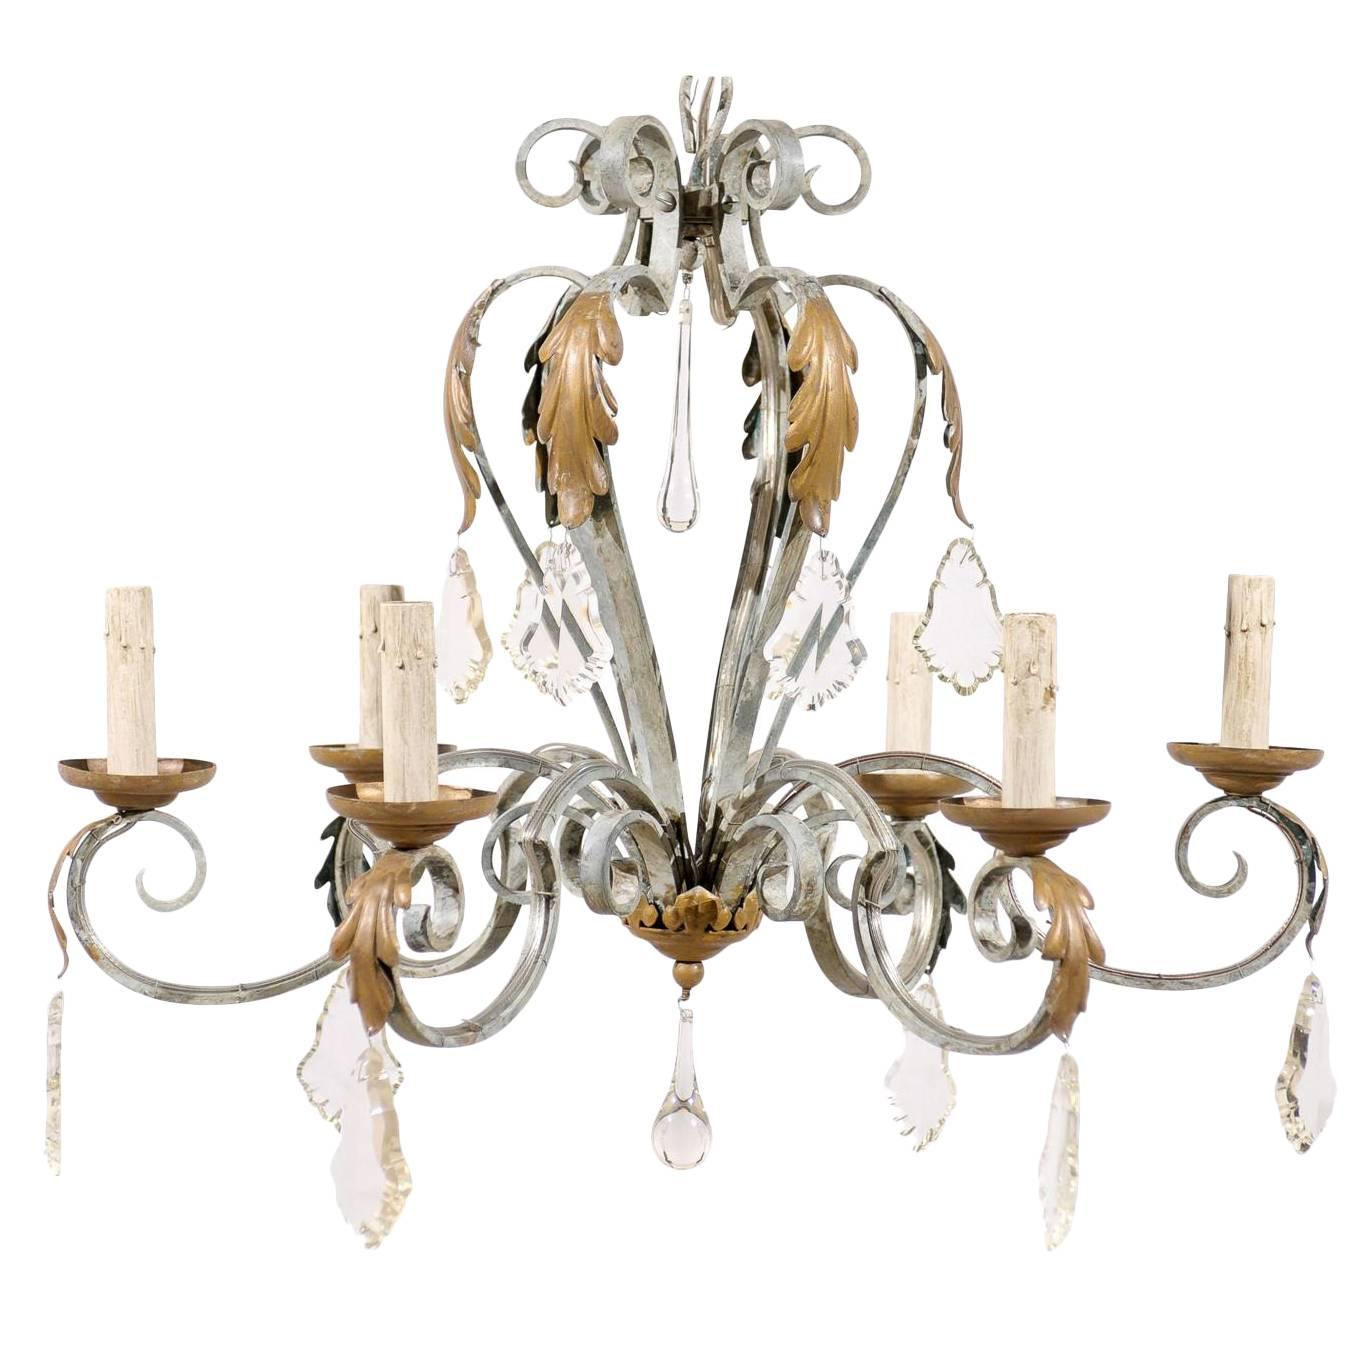 Vintage French Six-Light Painted Iron and Crystal Chandelier